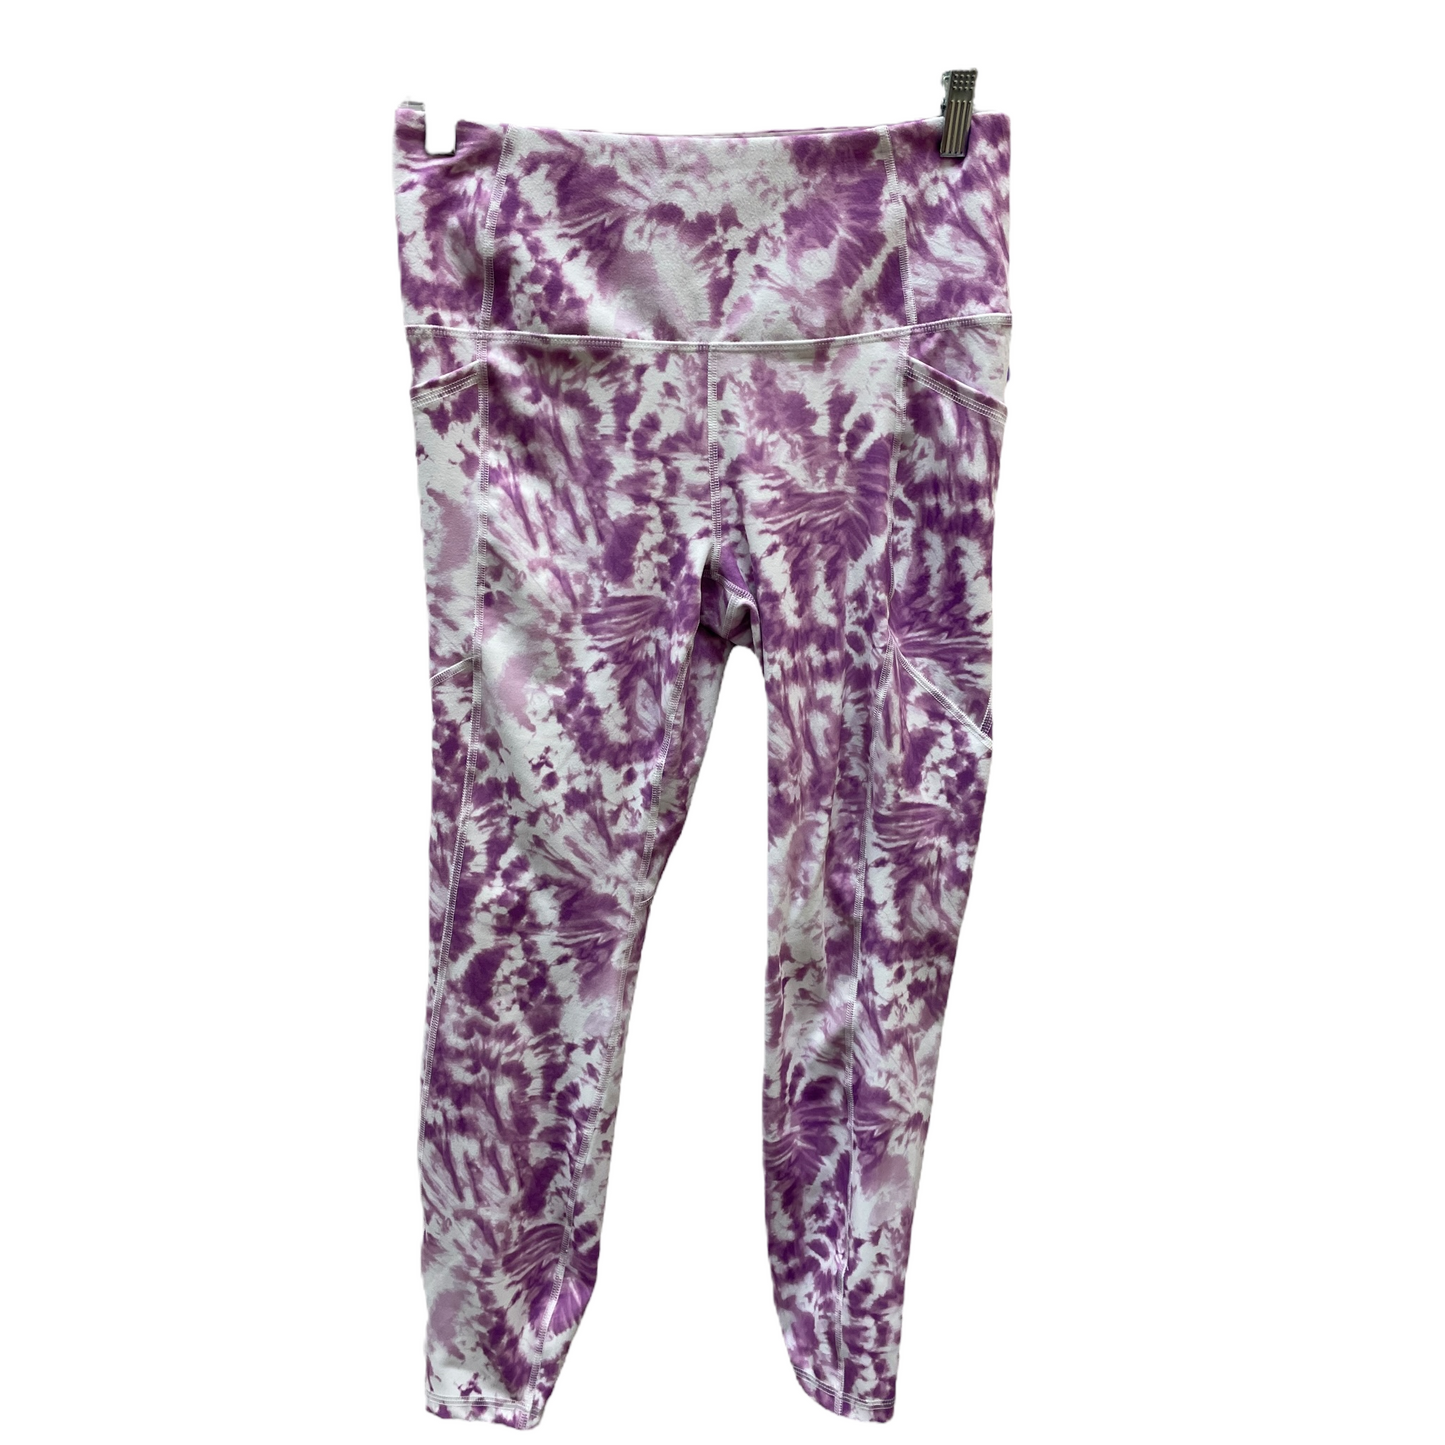 Purple & White Athletic Leggings By Rbx, Size: M